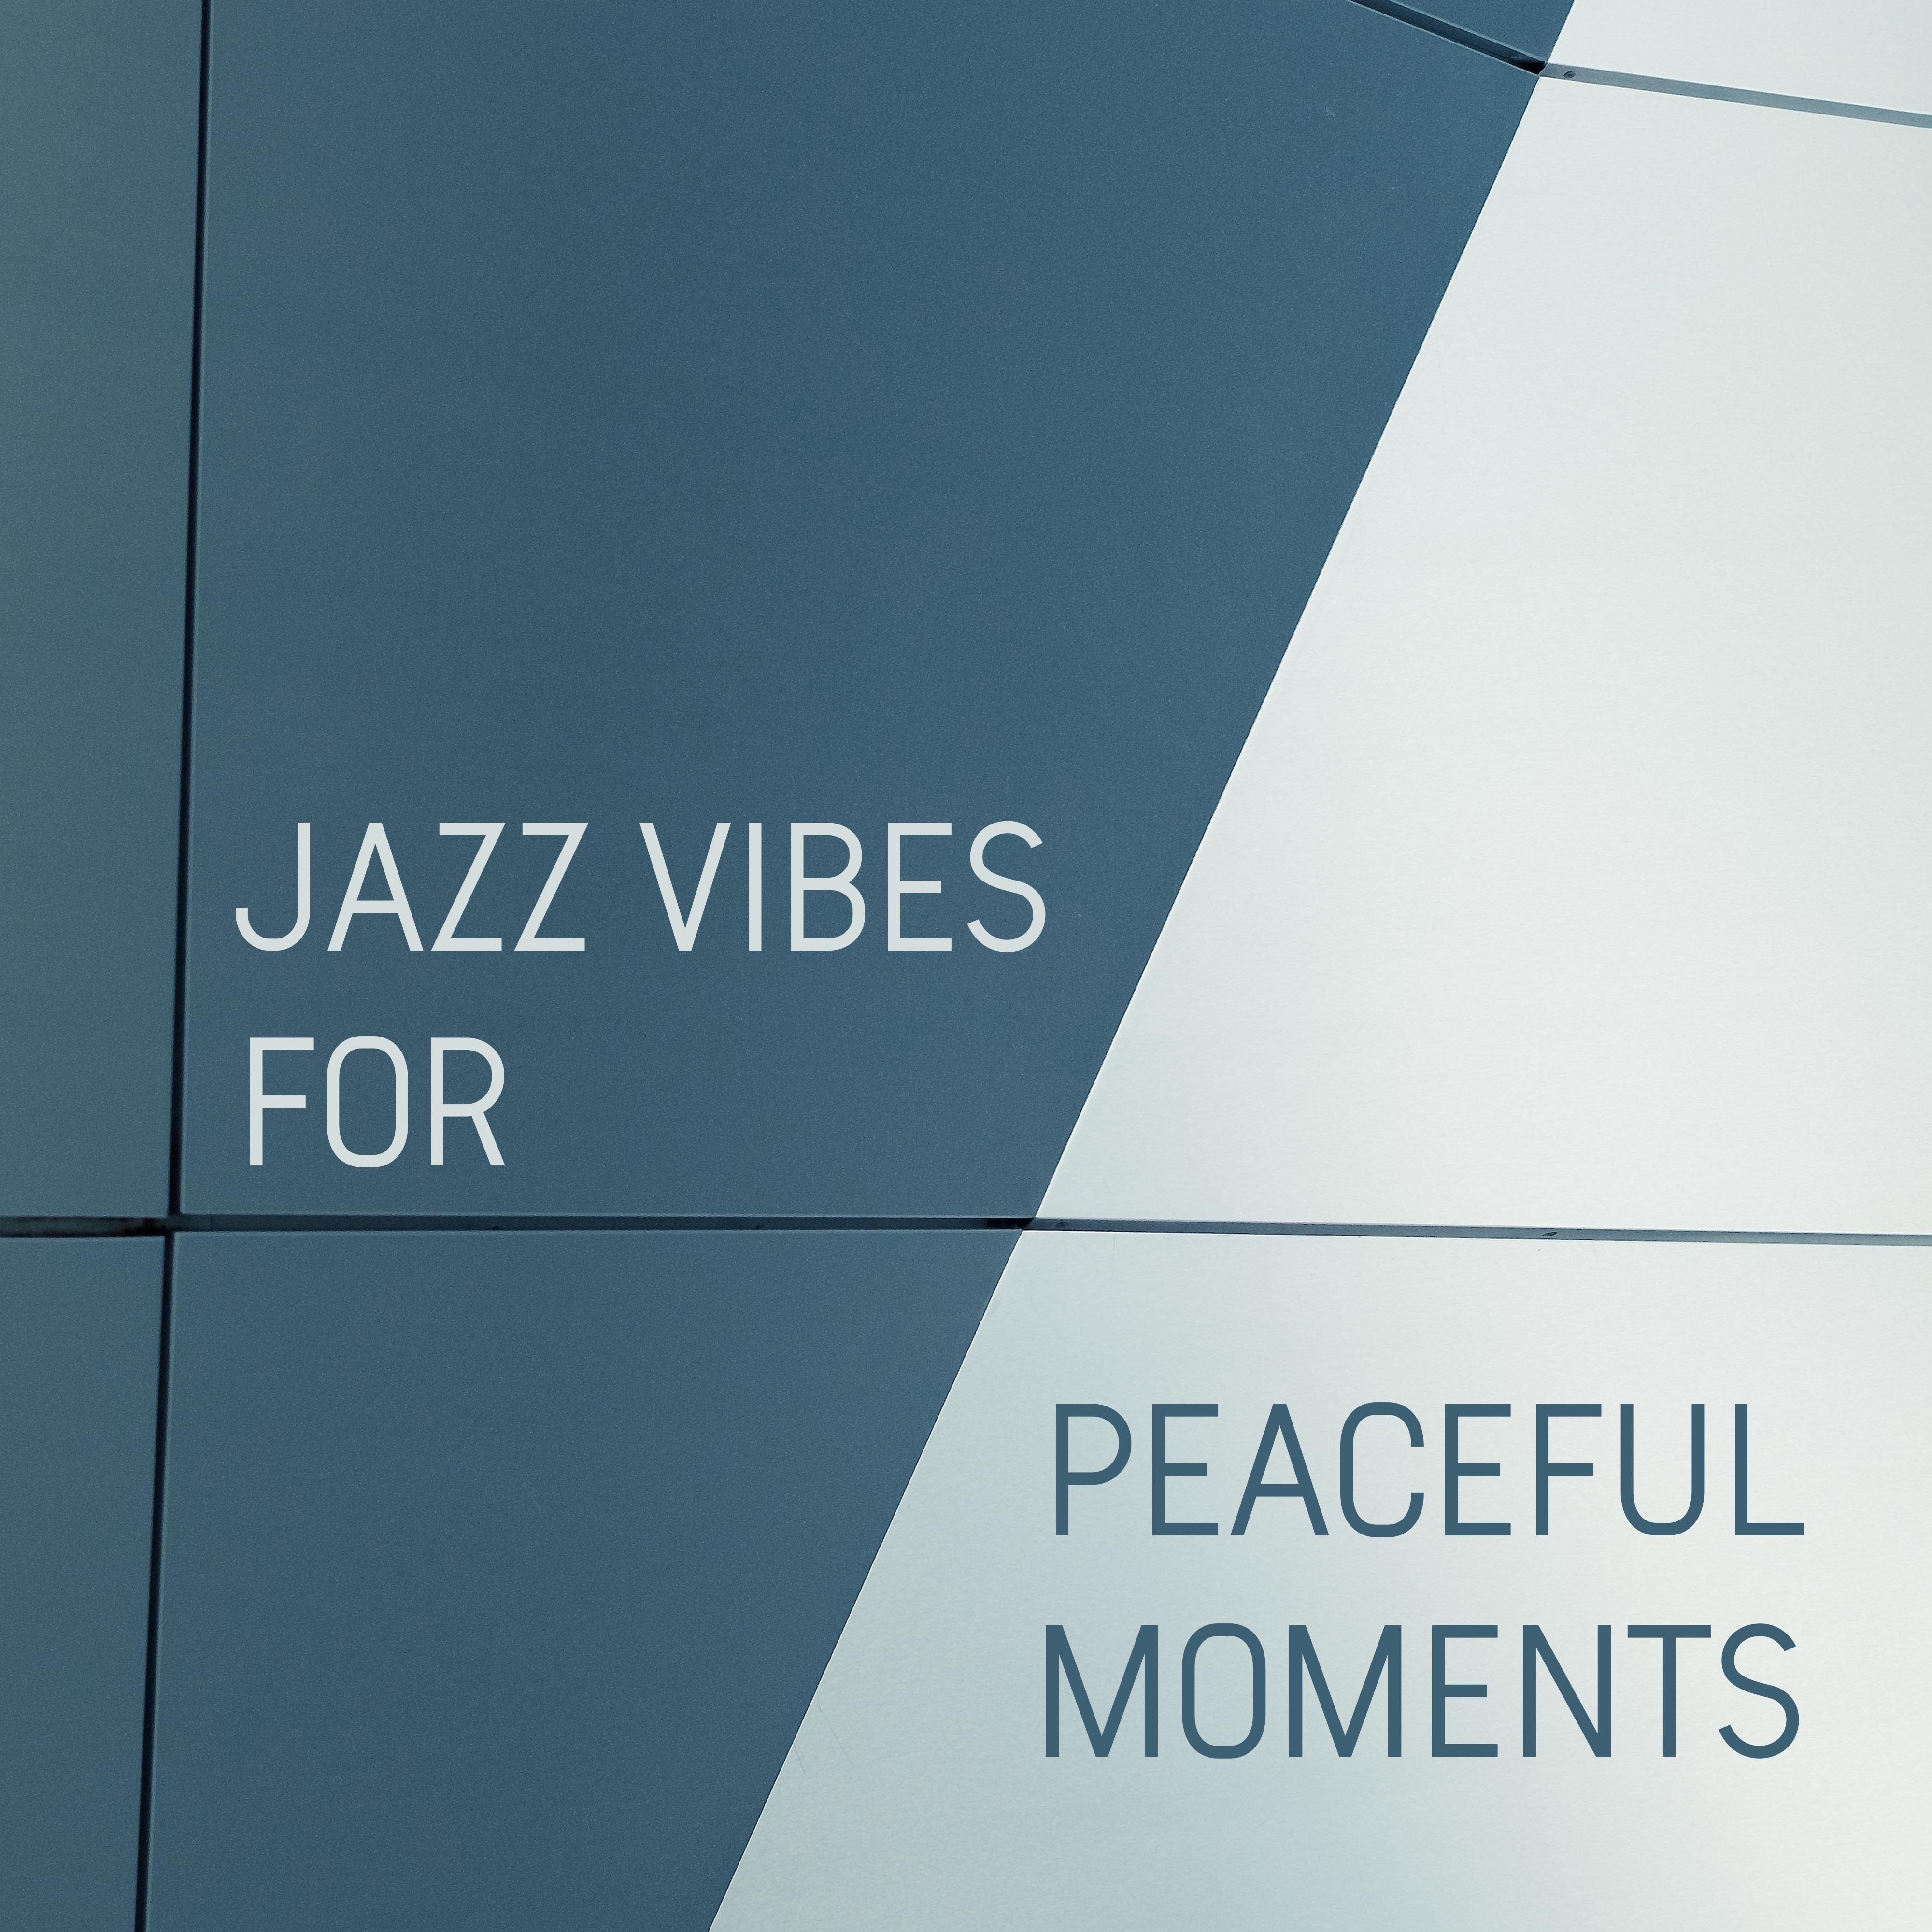 Jazz Vibes for Peaceful Moments